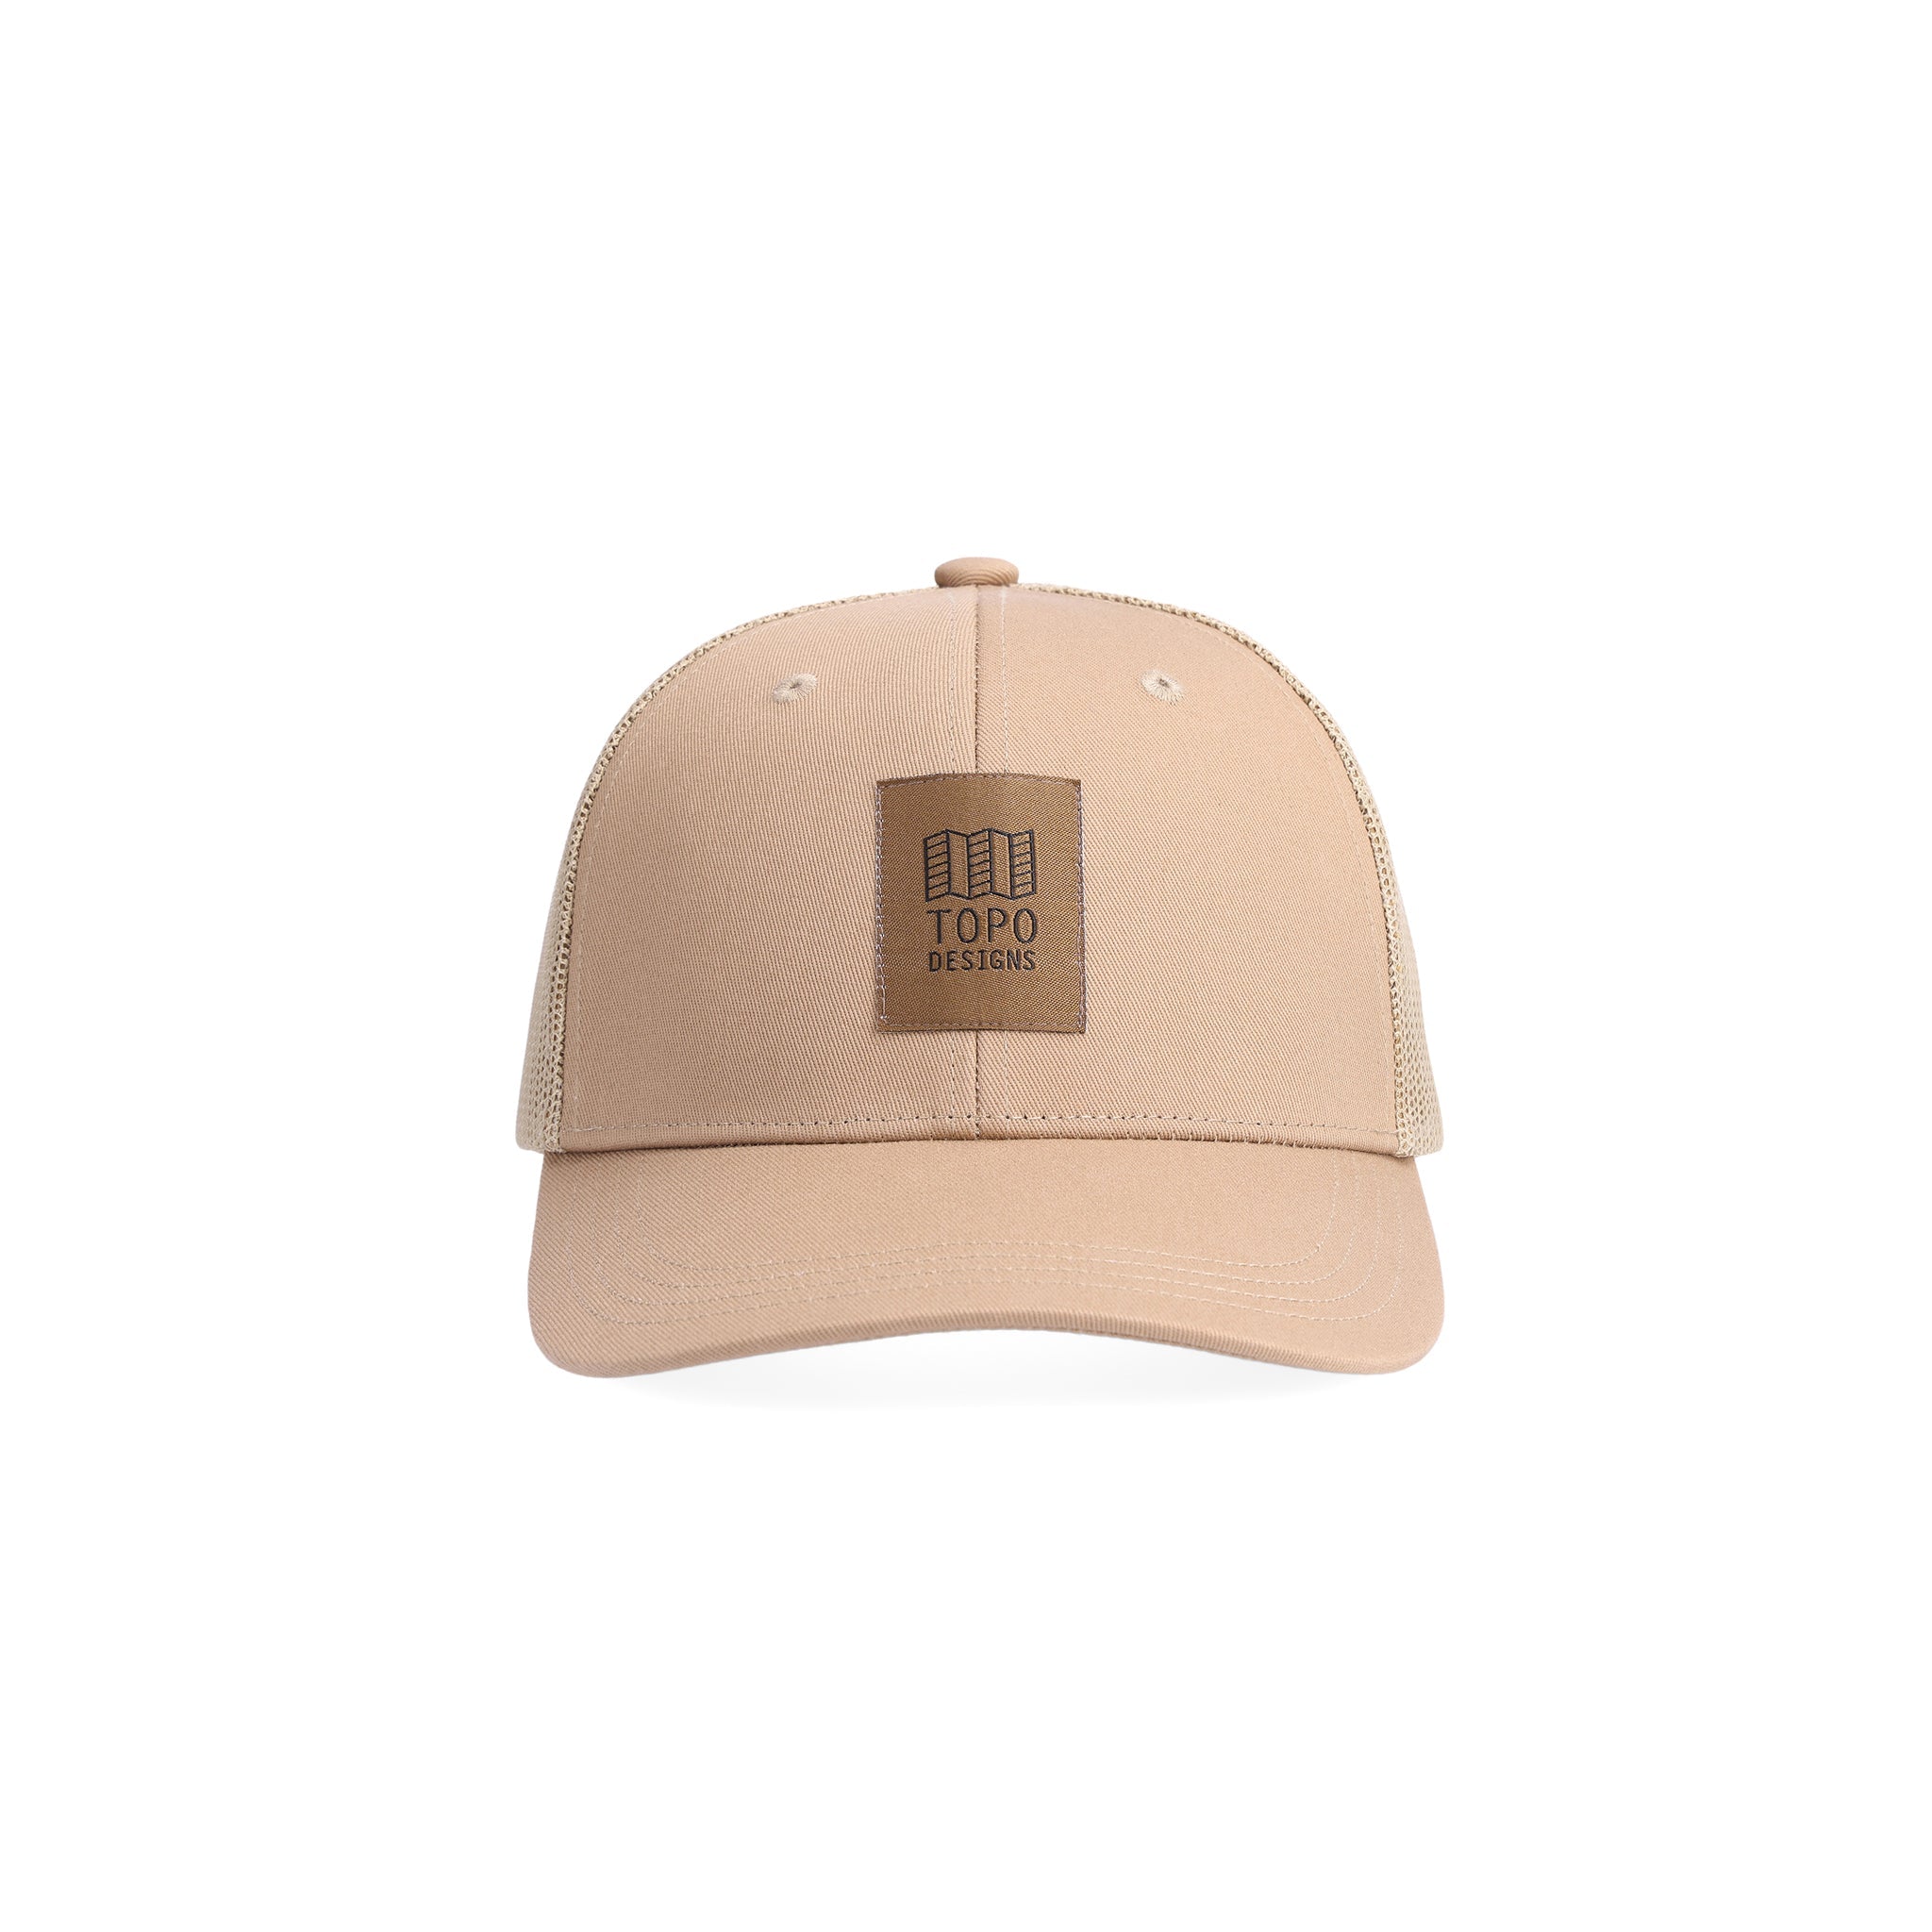 Front shot of Topo Designs Trucker Hat with mesh back and original logo patch in "Tan".